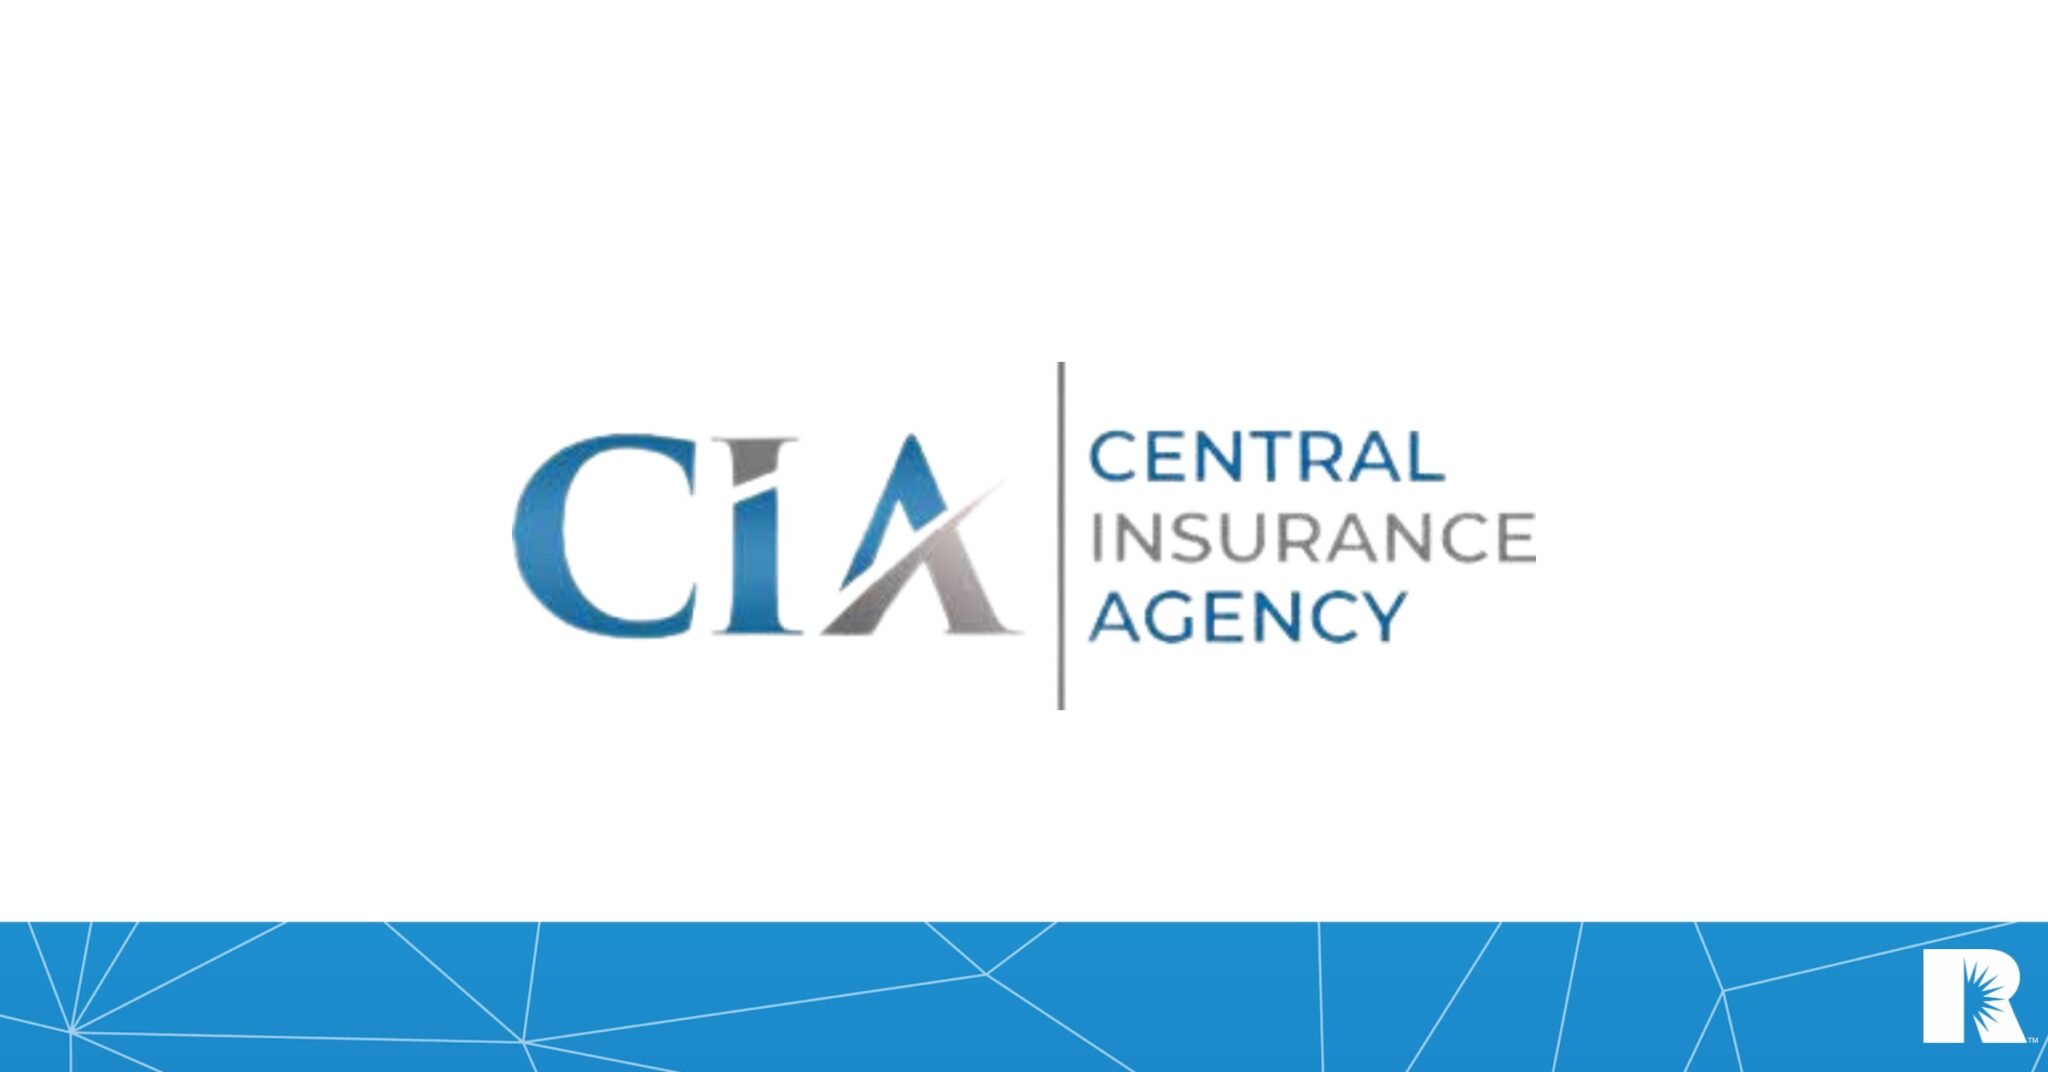 New Yorks Central Insurance Agency Joins Renaissance Alliance